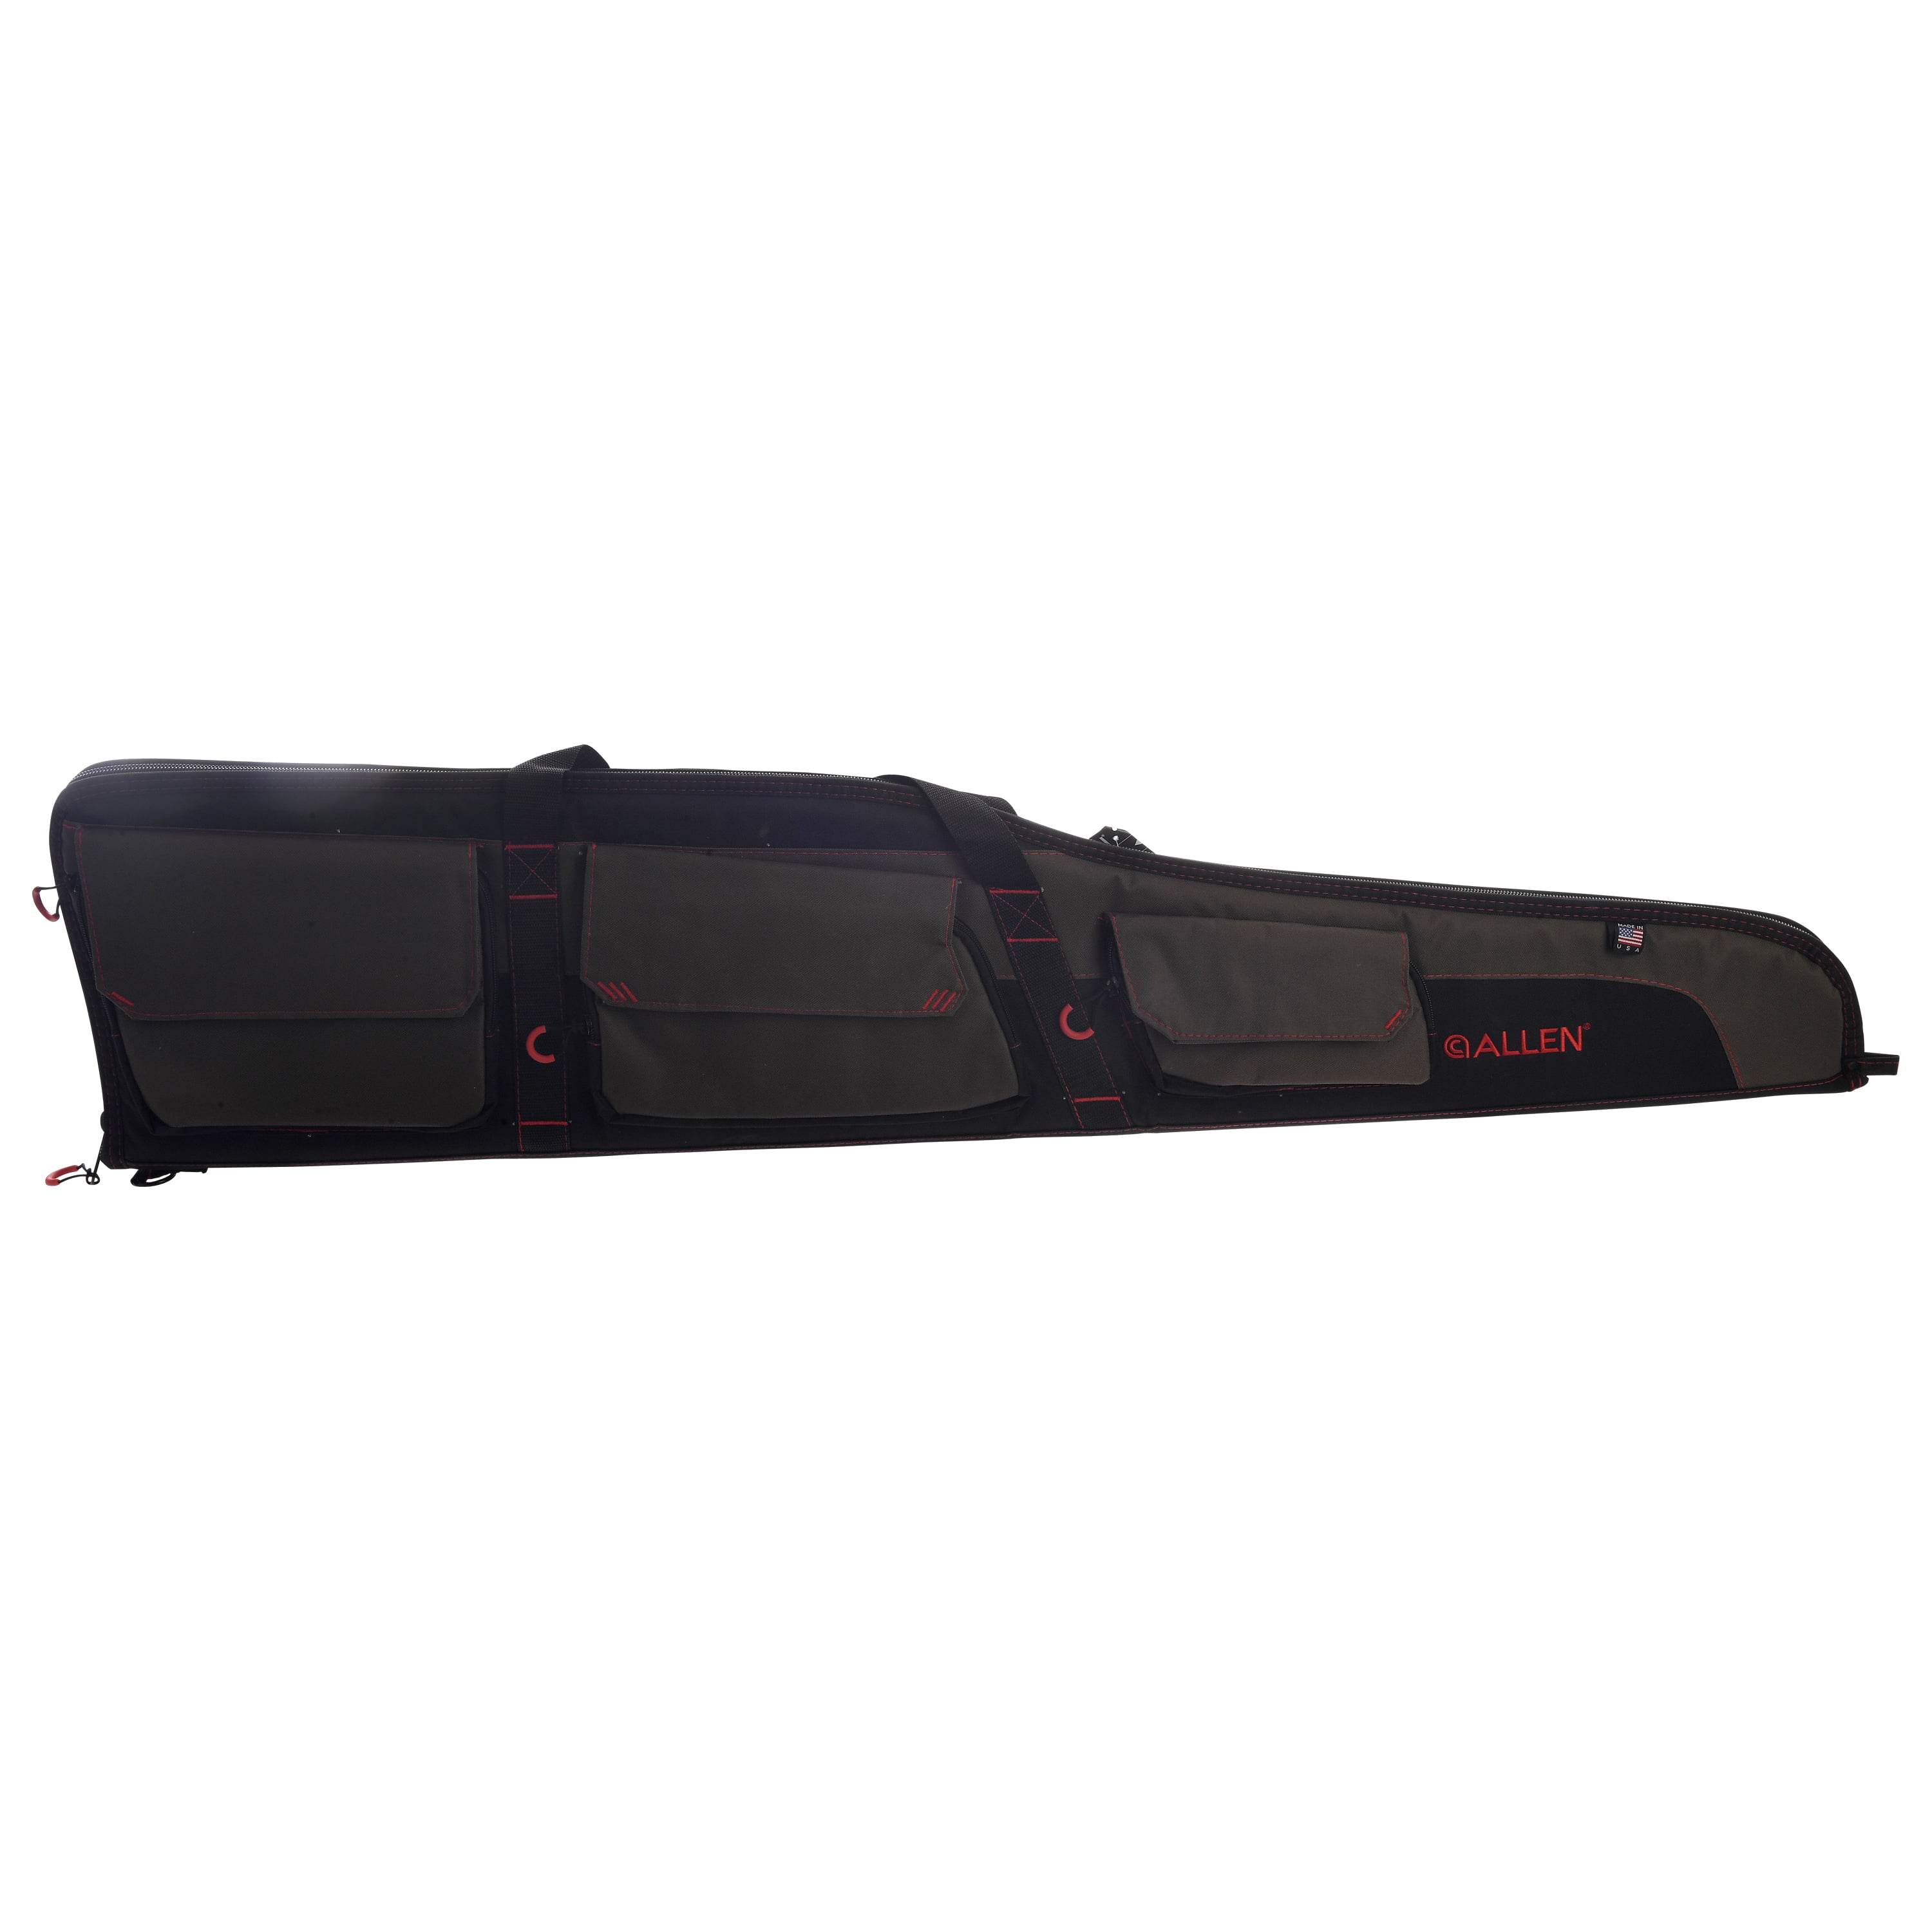 HUNTING RIFLE CASE BRAND NEW 